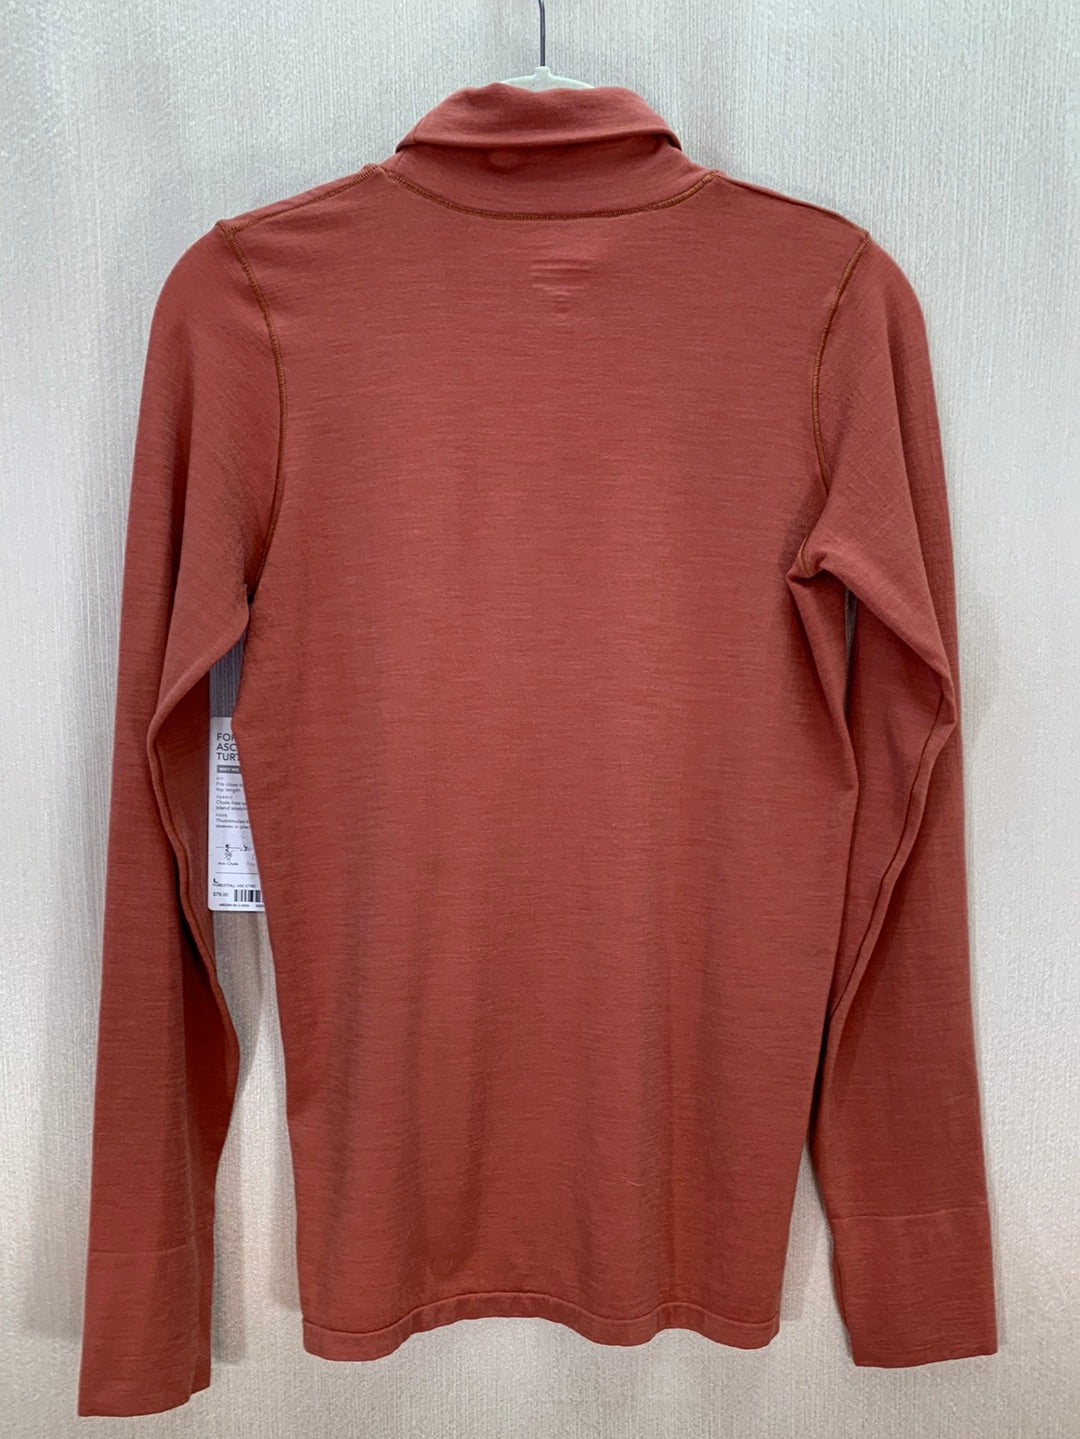 NWT - ATHLETA etruscan red Wool Blend Foresthill Ascent Turtleneck - L